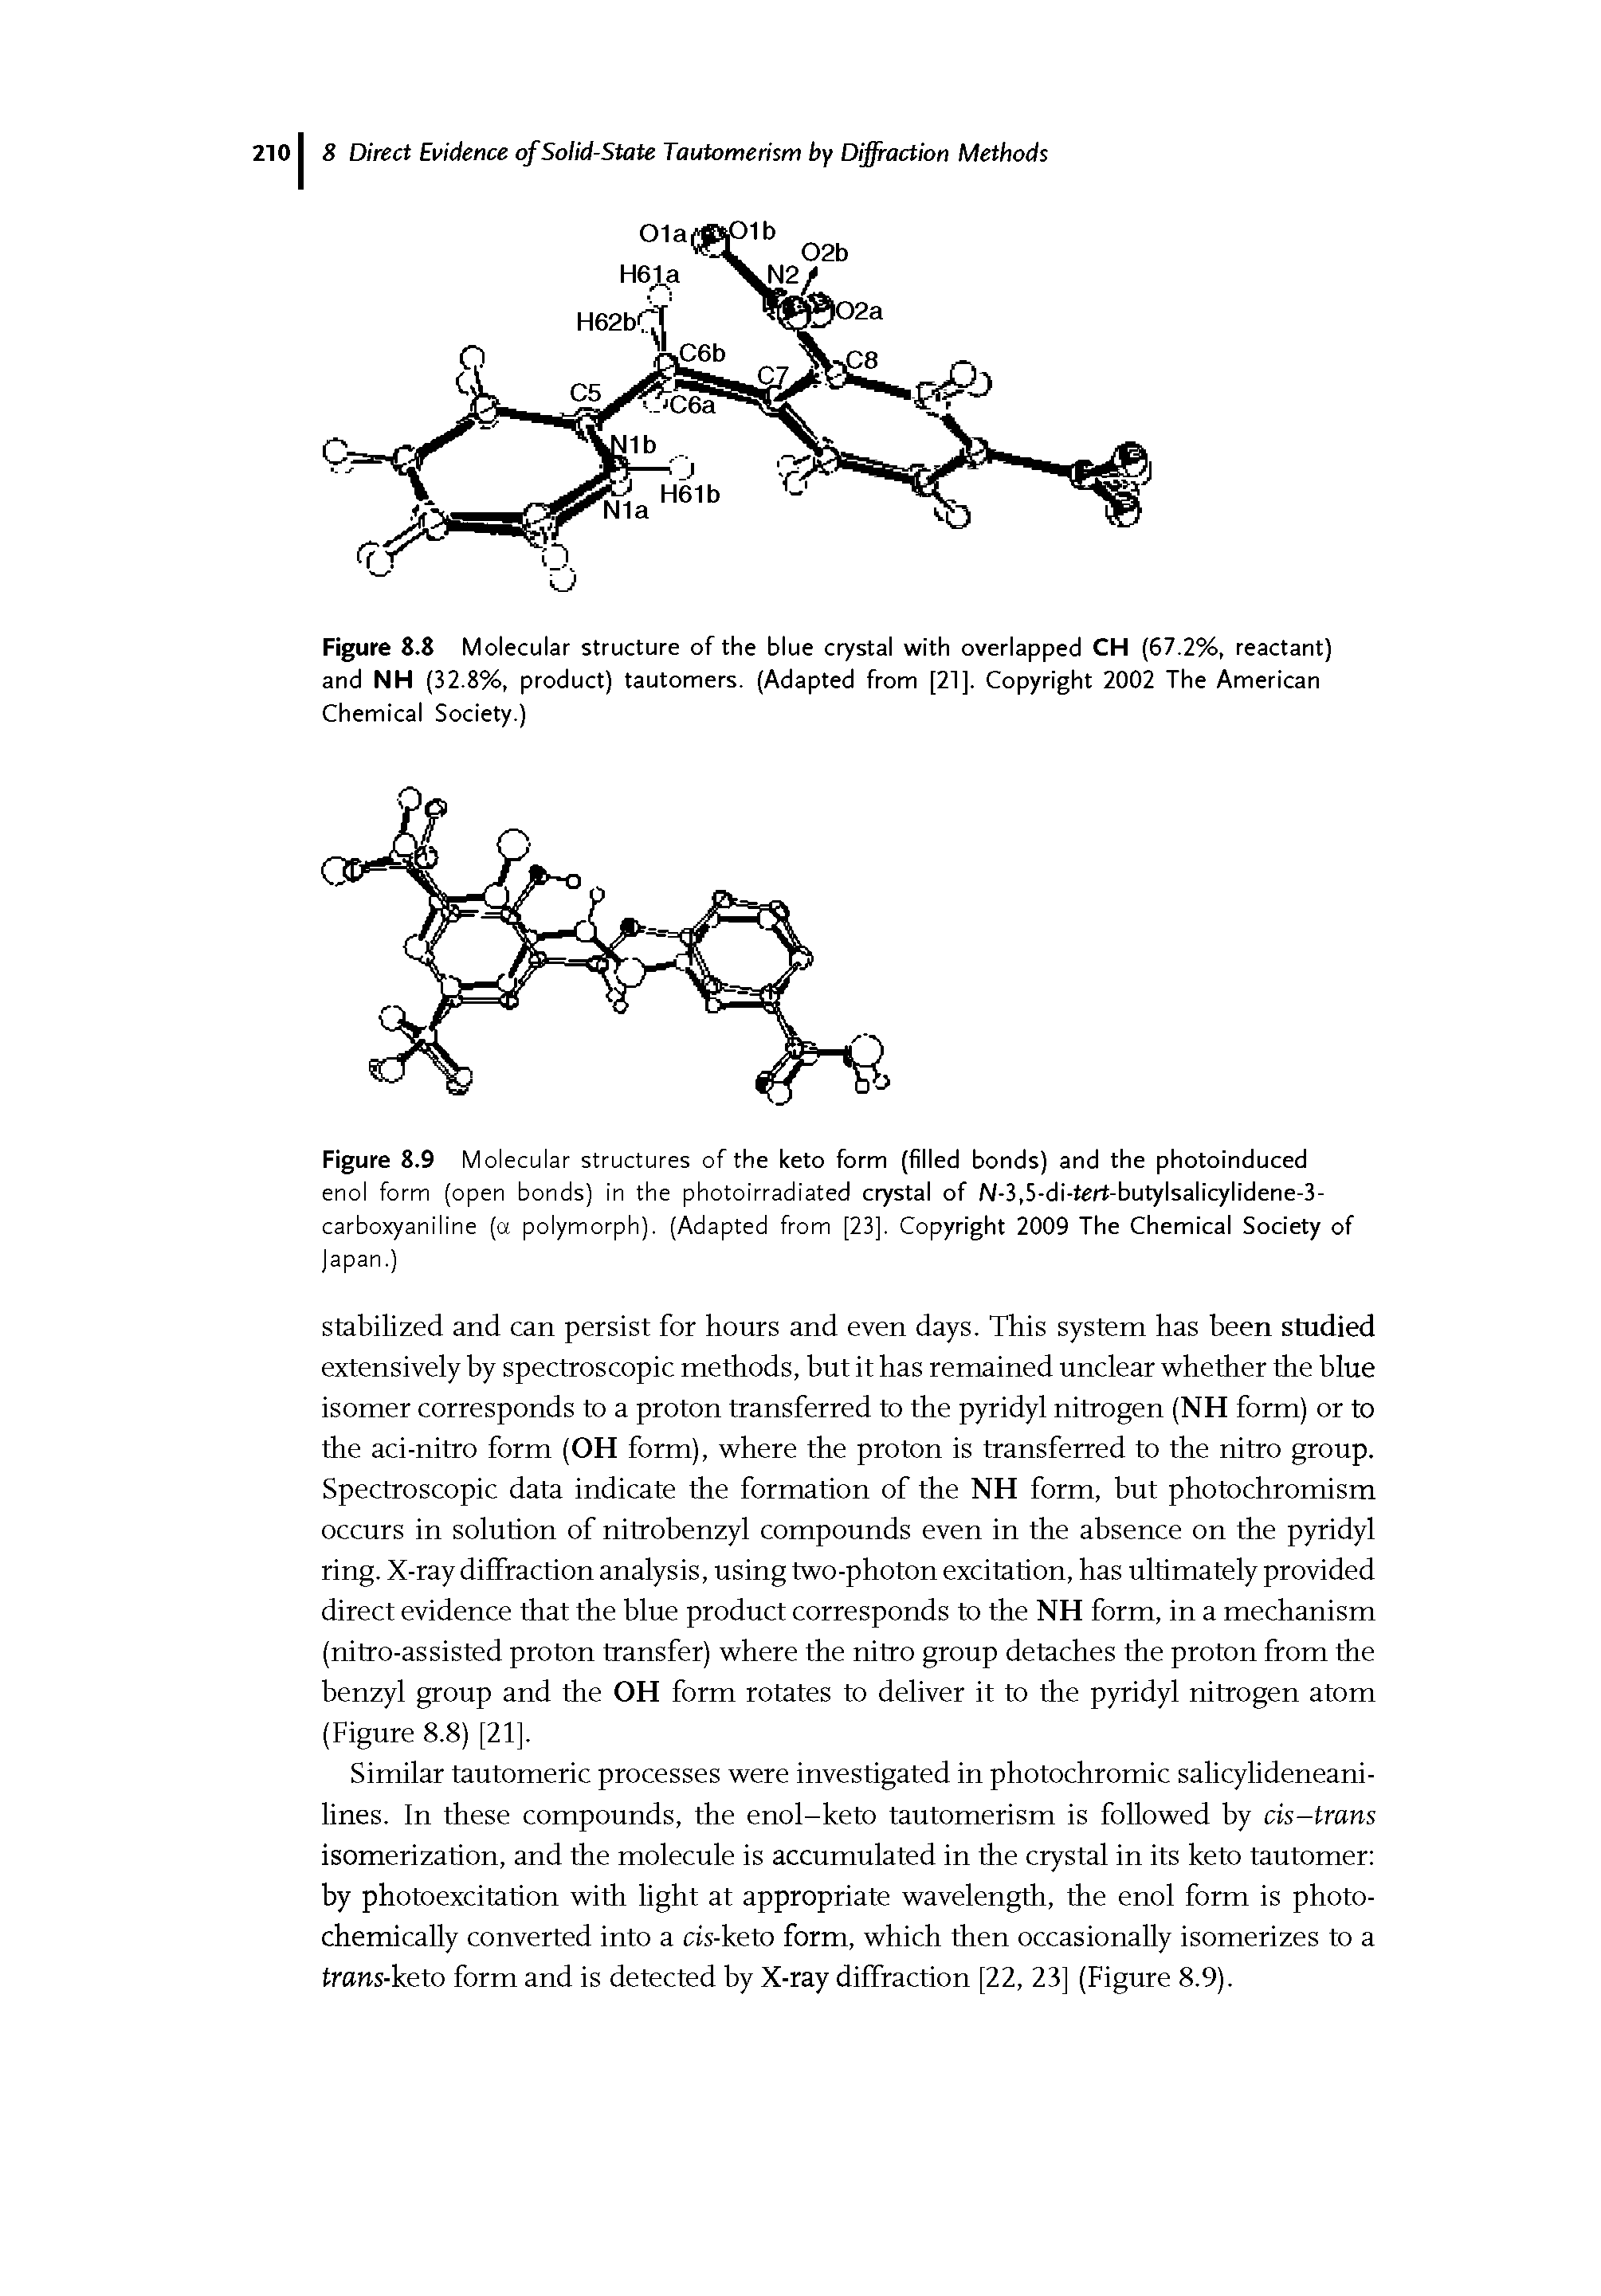 Figure 8.9 Molecular structures of the keto form (filled bonds) and the photoinduced enol form (open bonds) in the photoirradiated crystal of N-3,5-di-tert-butylsalicylidene-3-carboxyaniline (a polymorph). (Adapted from [23]. Copyright 2009 The Chemical Society of japan.)...